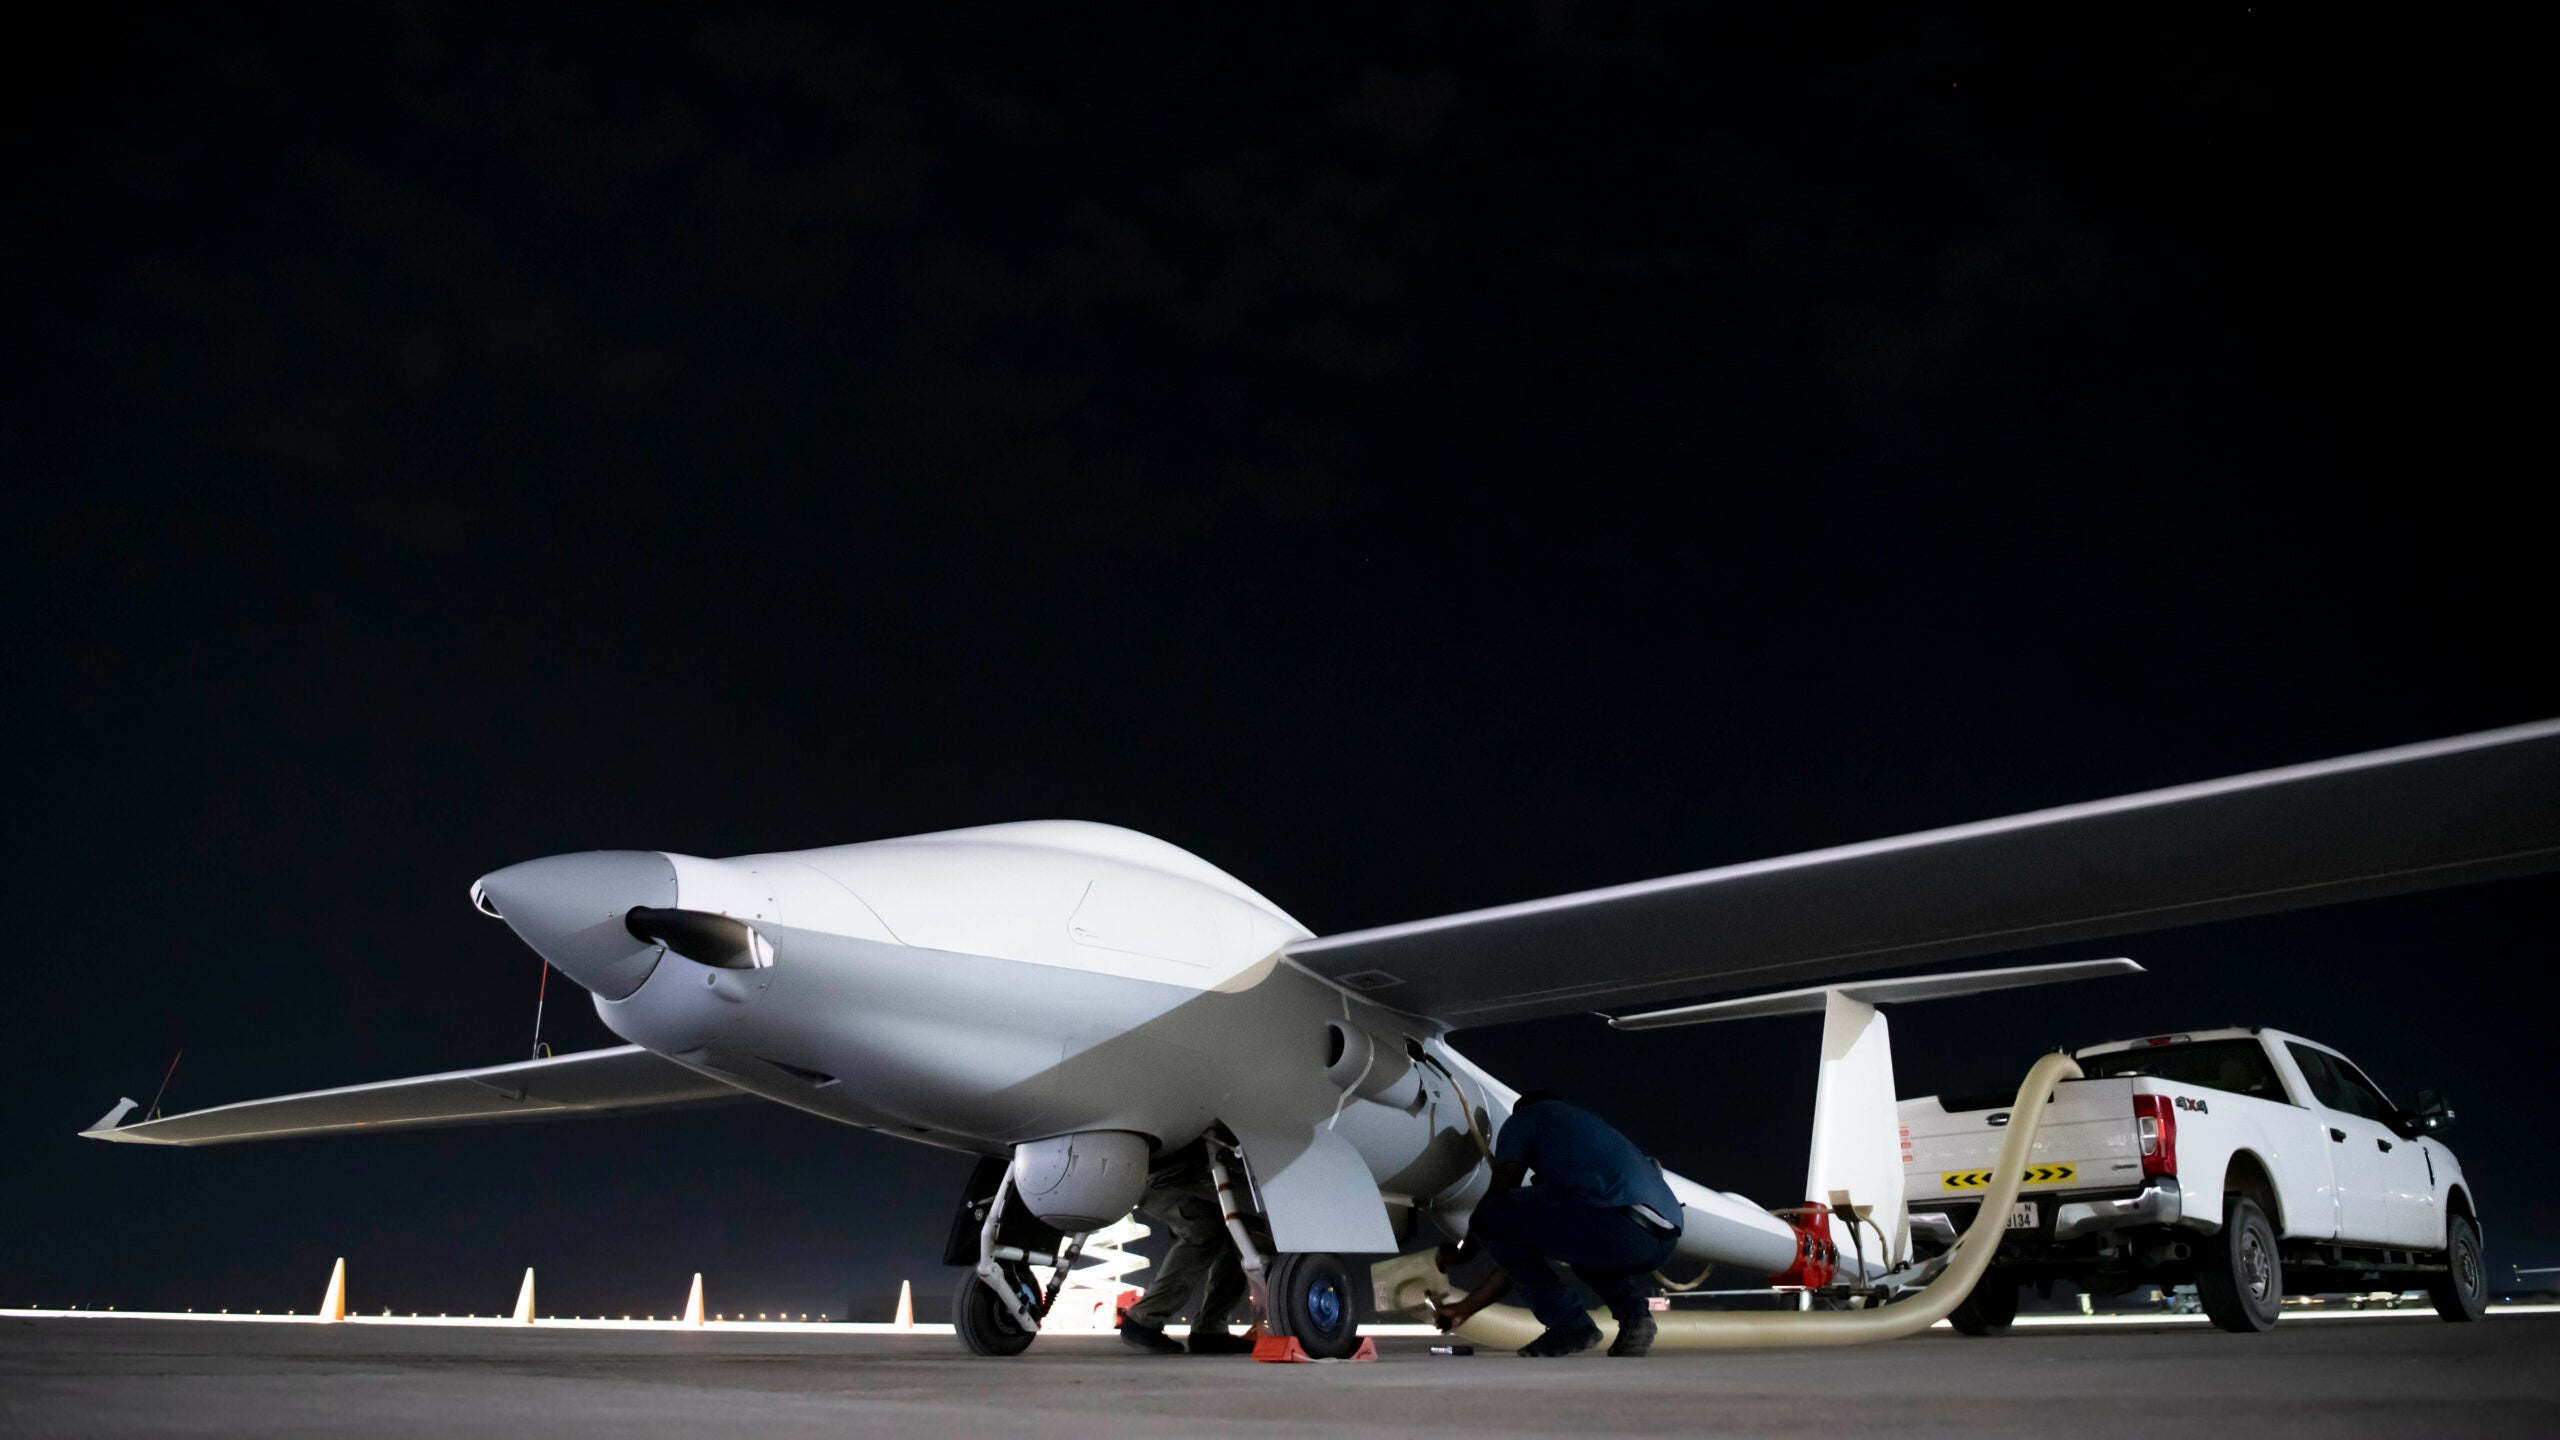 air force's ultra long-endurance glider-like drone is now operating in the middle east